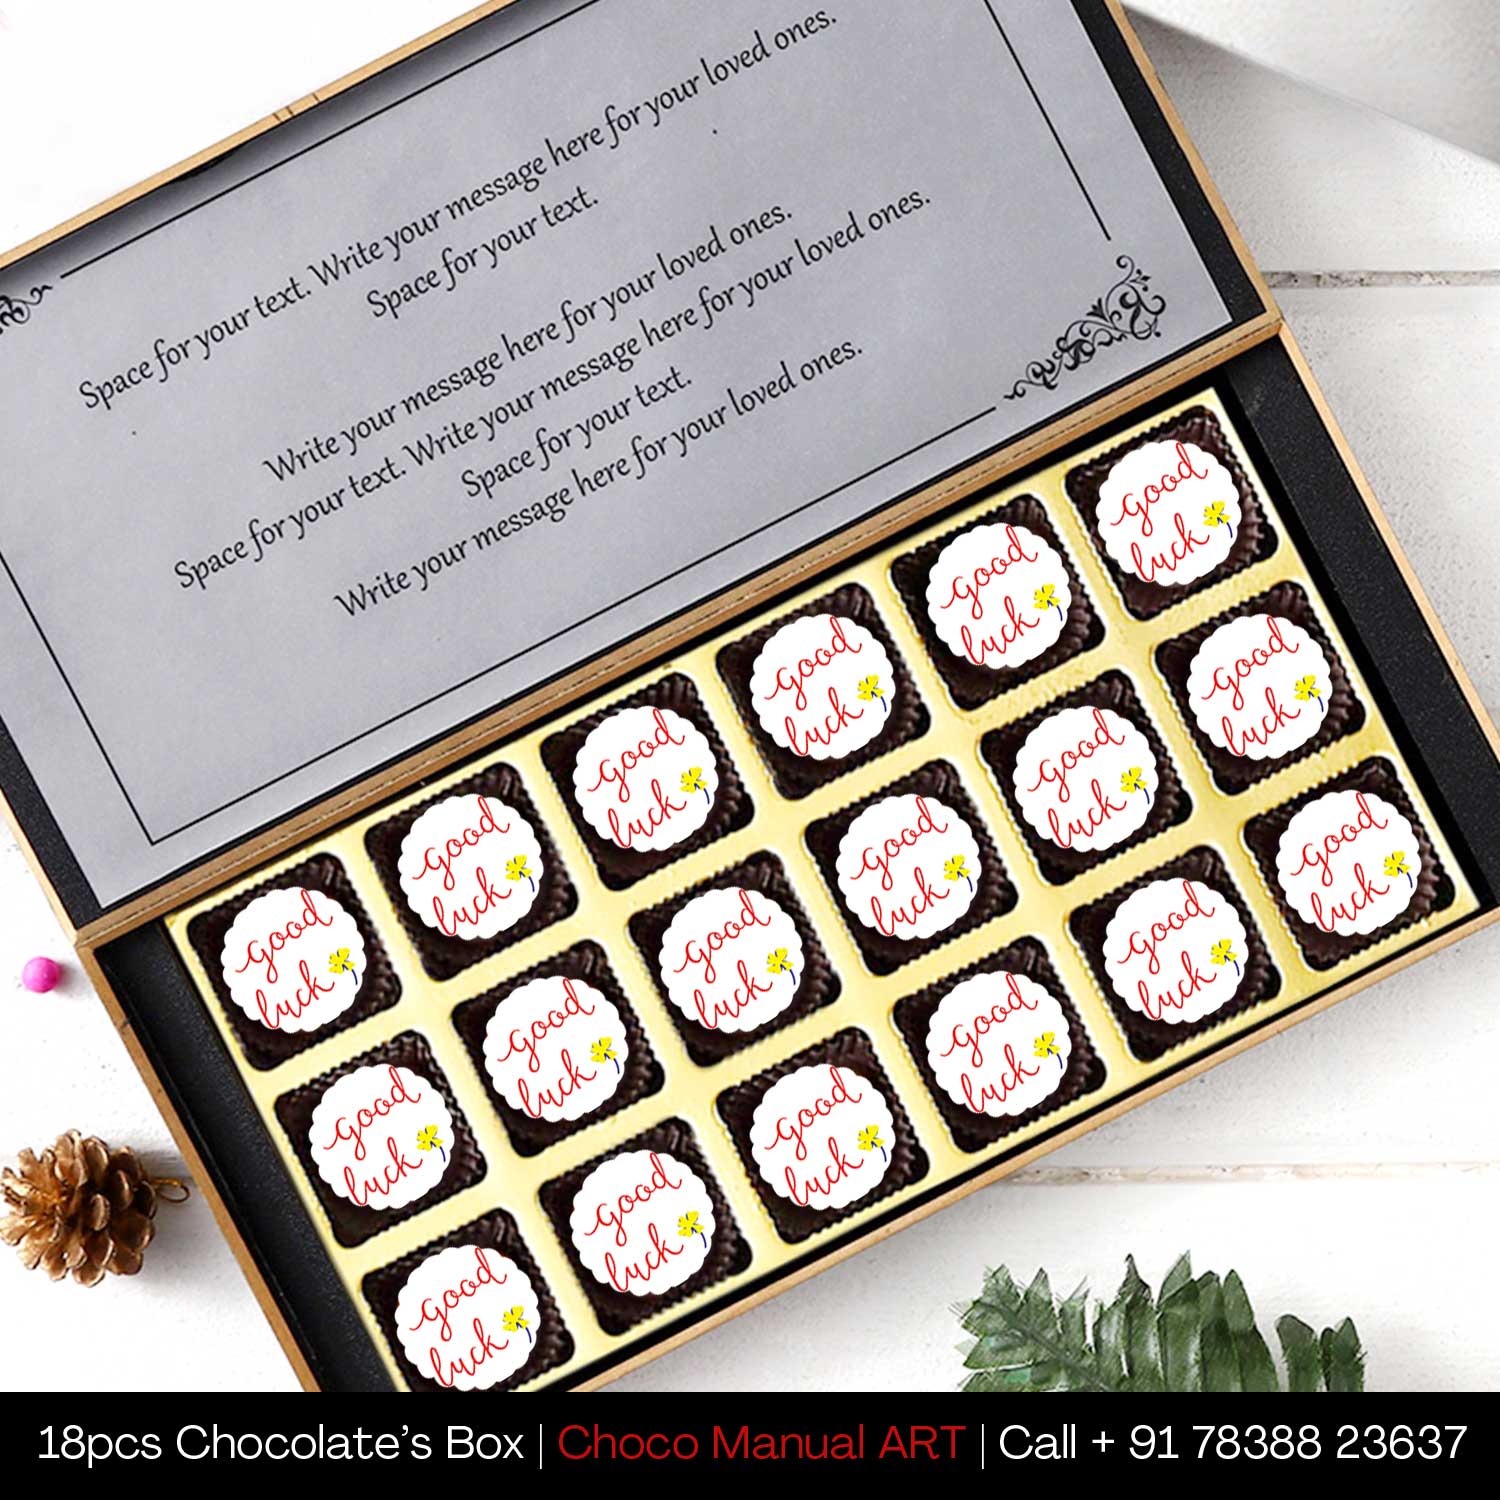  customized chocolate shop near me customised chocolate box personalised chocolates for birthdays personalised chocolate hamper chocolate with photo printed on it customized chocolate box near me customised chocolate wrapper customized chocolate with names